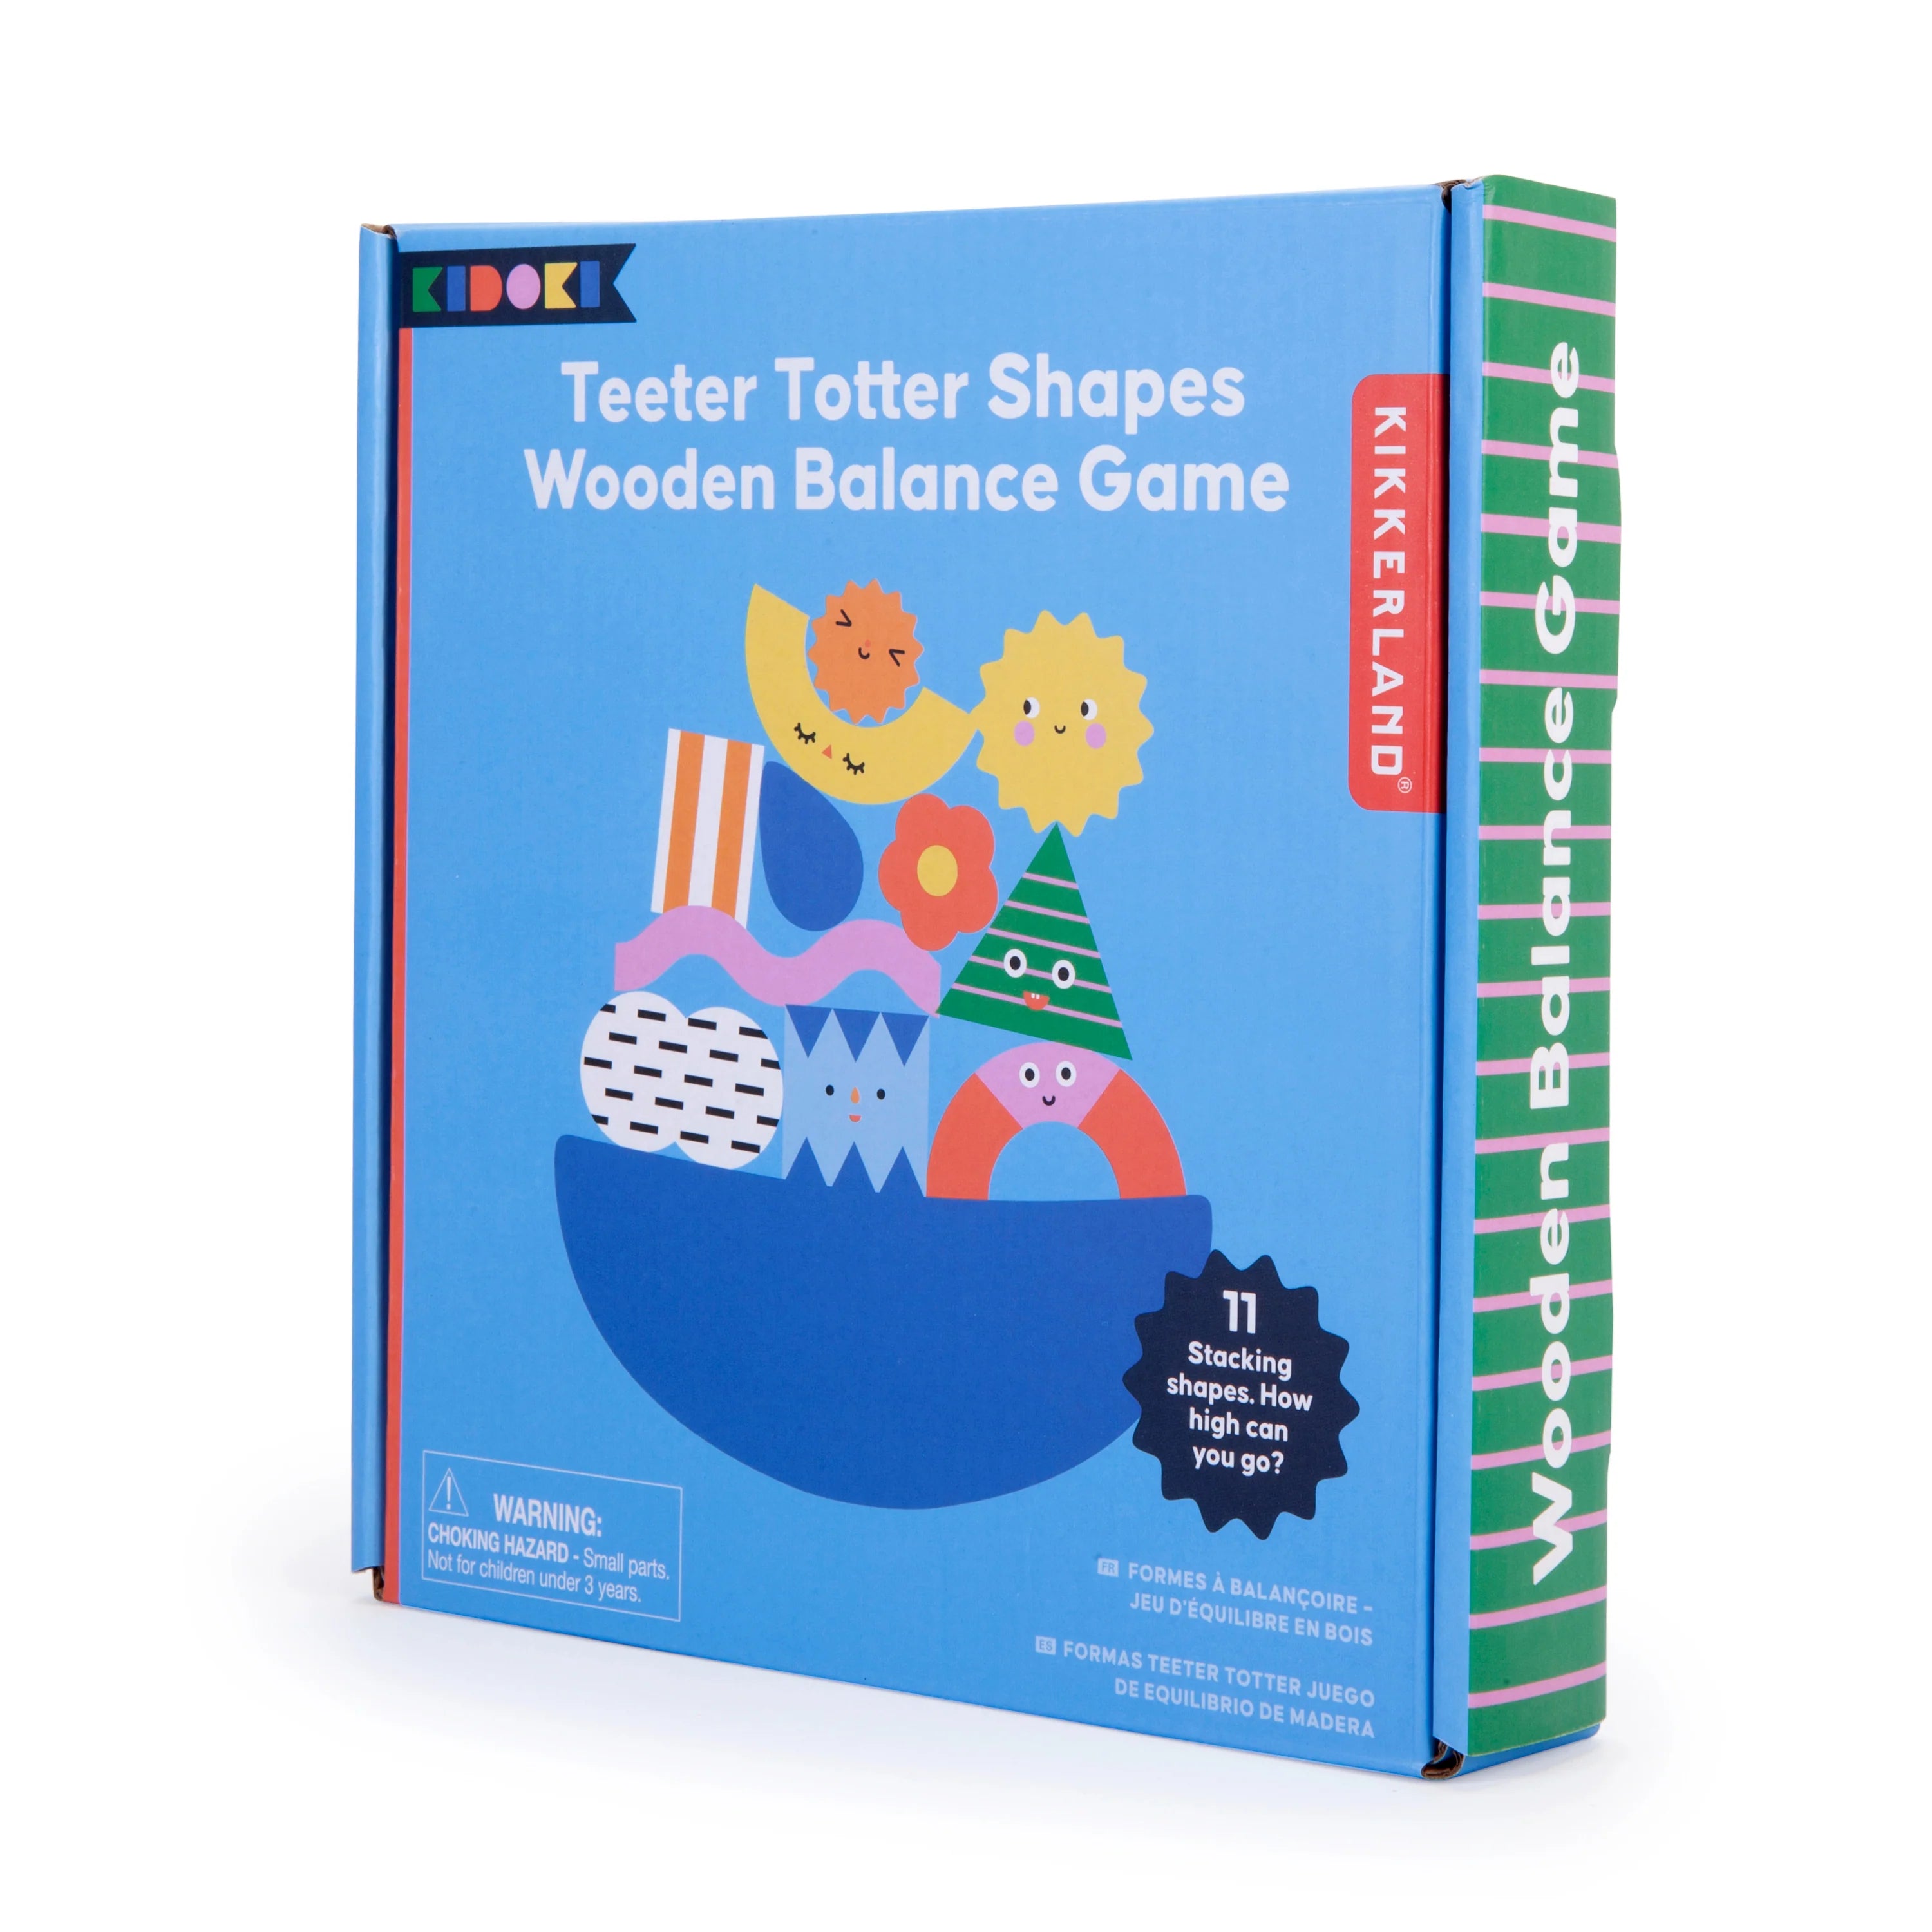 Wooden Balance Game - Teeter Totter Shapes